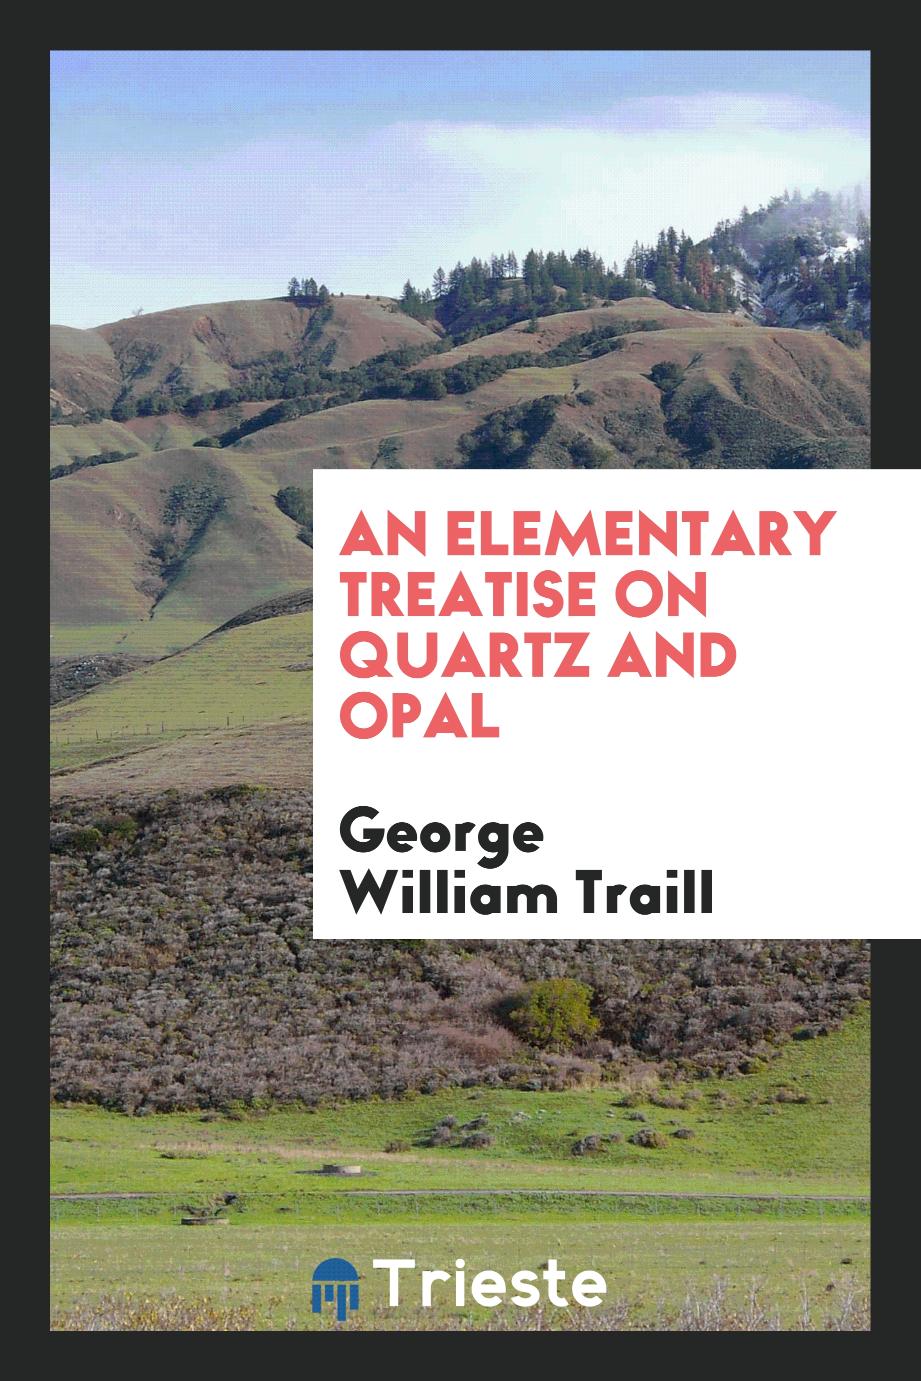 An elementary treatise on quartz and opal